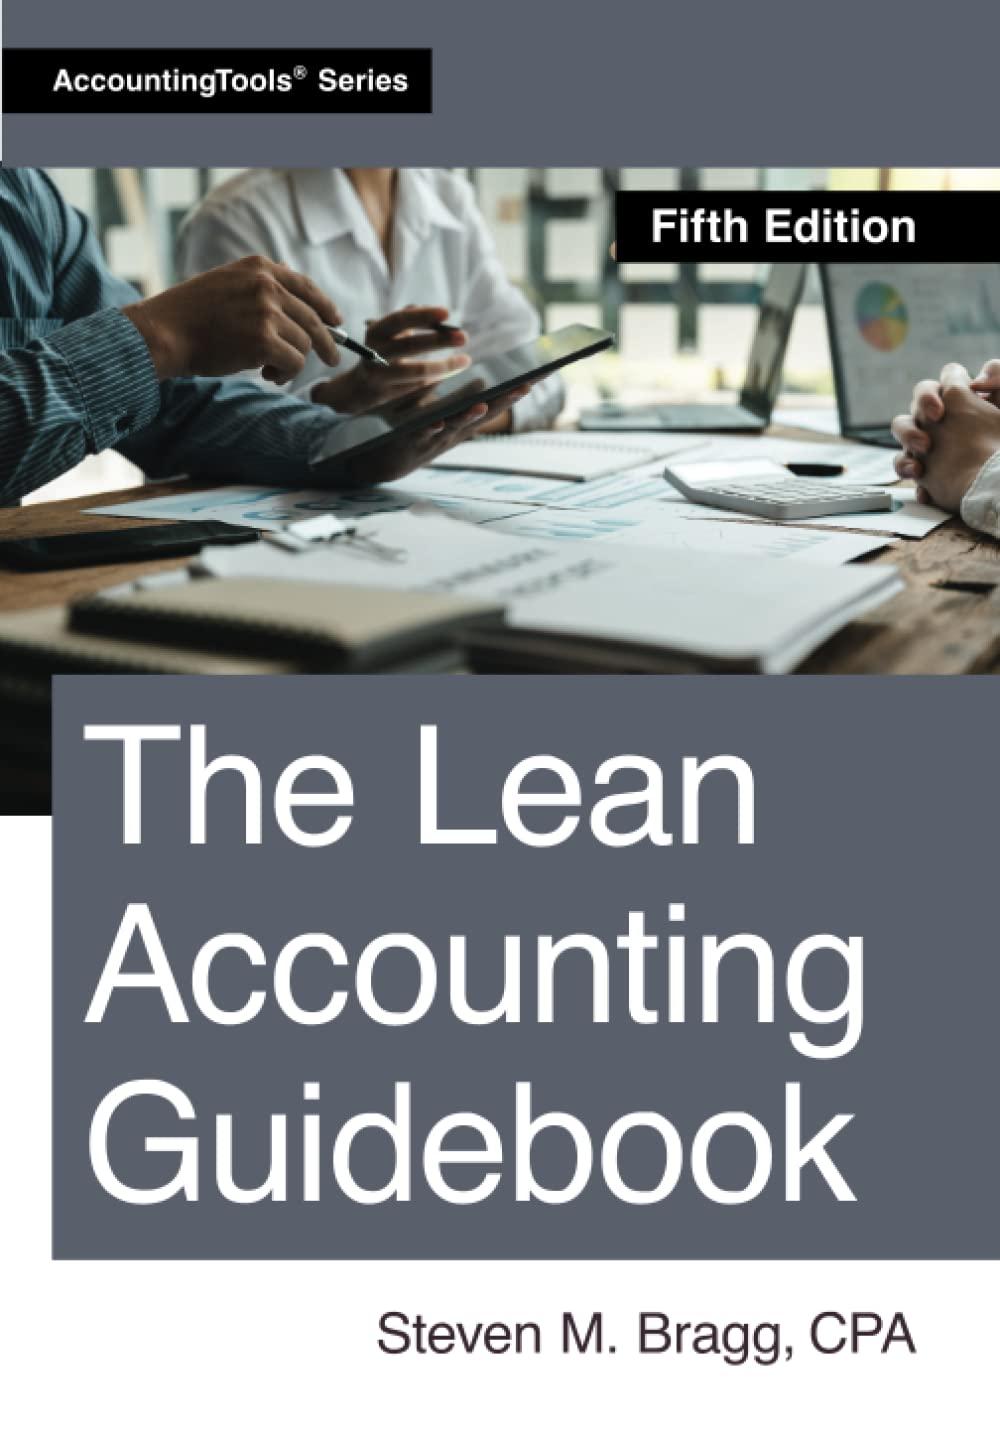 the lean accounting guidebook 5th edition steven m. bragg 1642210986, 978-1642210989